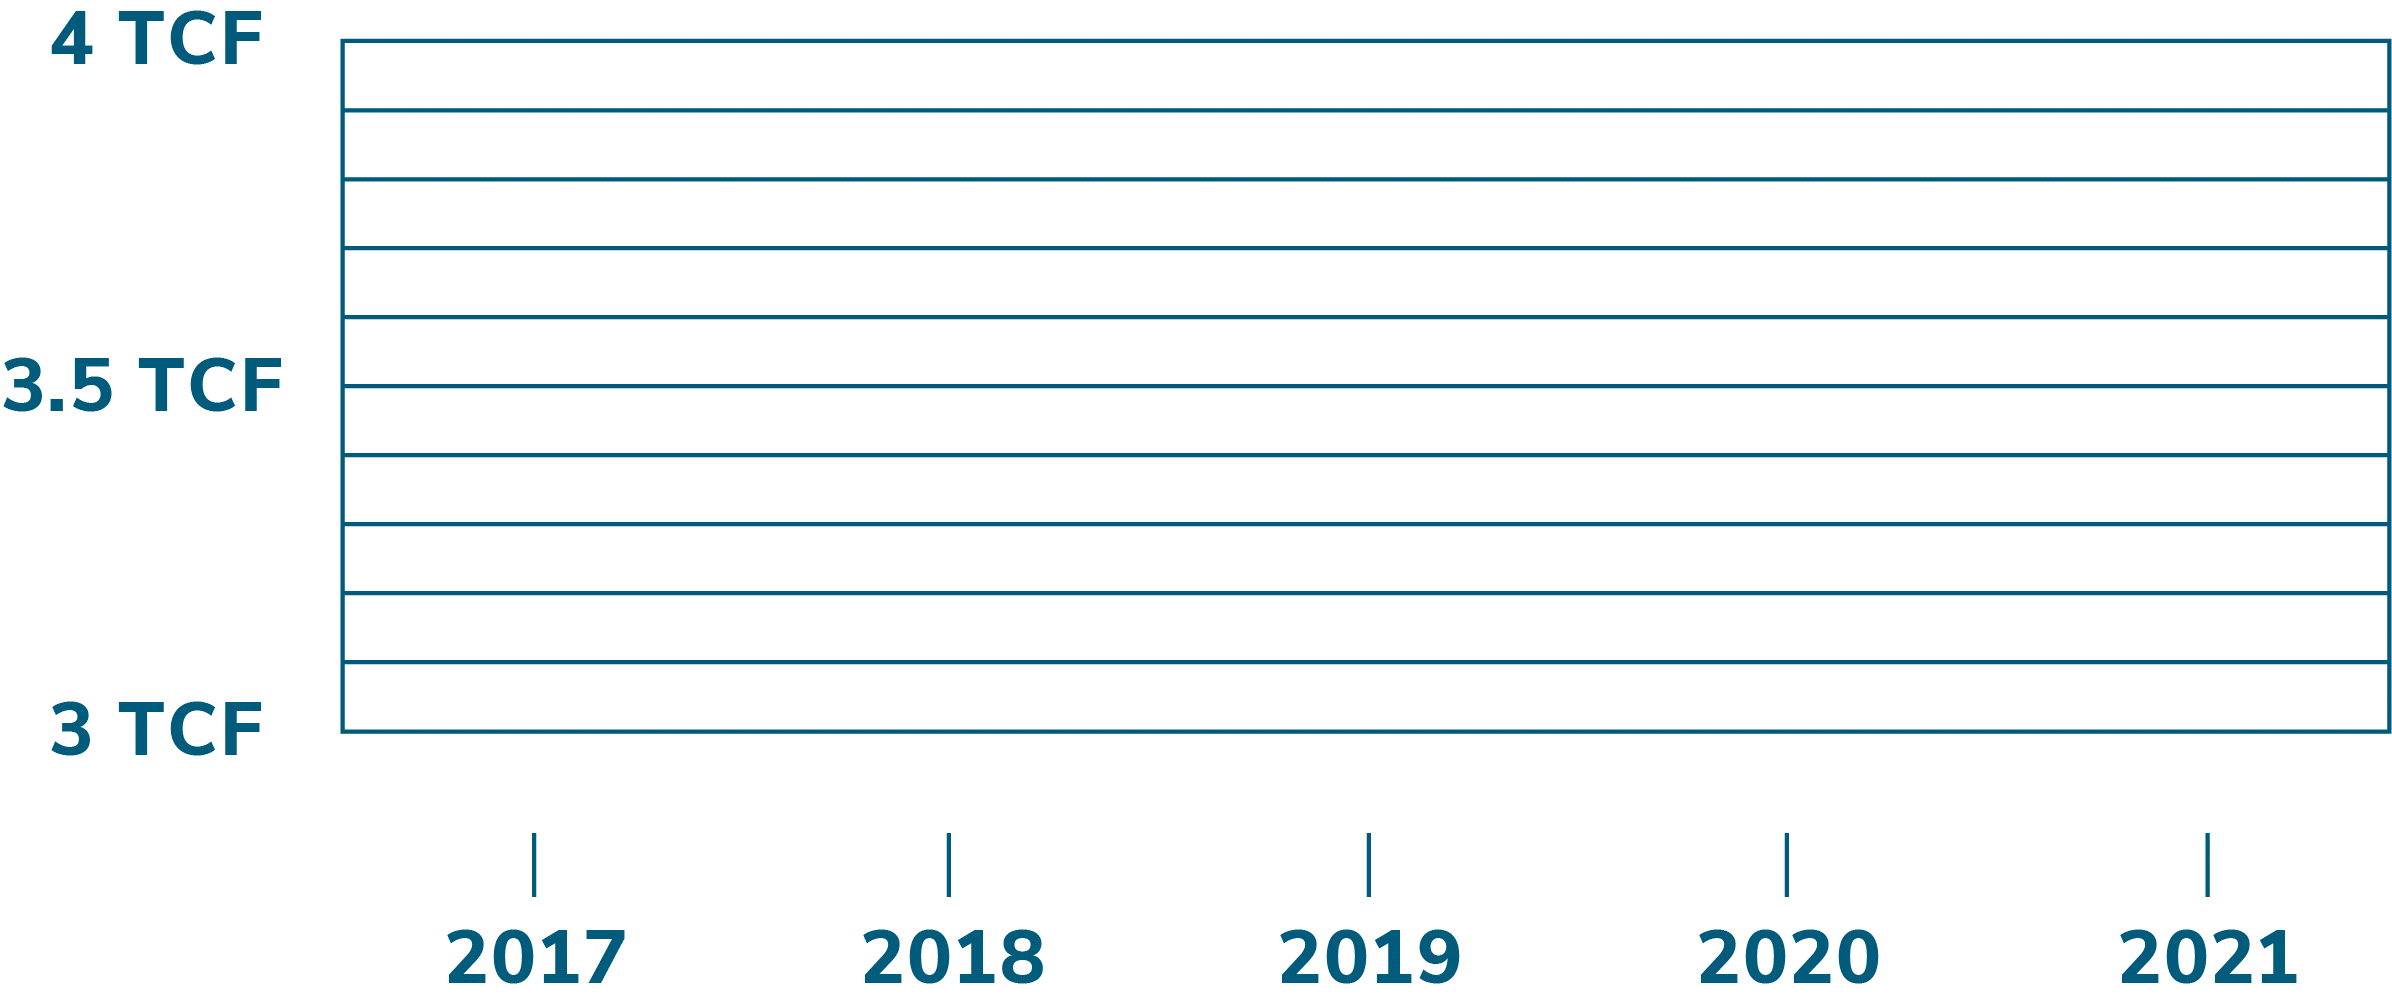 Line graph measuring TMV’s volume of natural gas sold or managed between the years 2017 and 2021, measured in trillion cubic feet. 2019 shows the peak volume at 3.91 tcf. In 2021, the volume was 3.83 tcf.